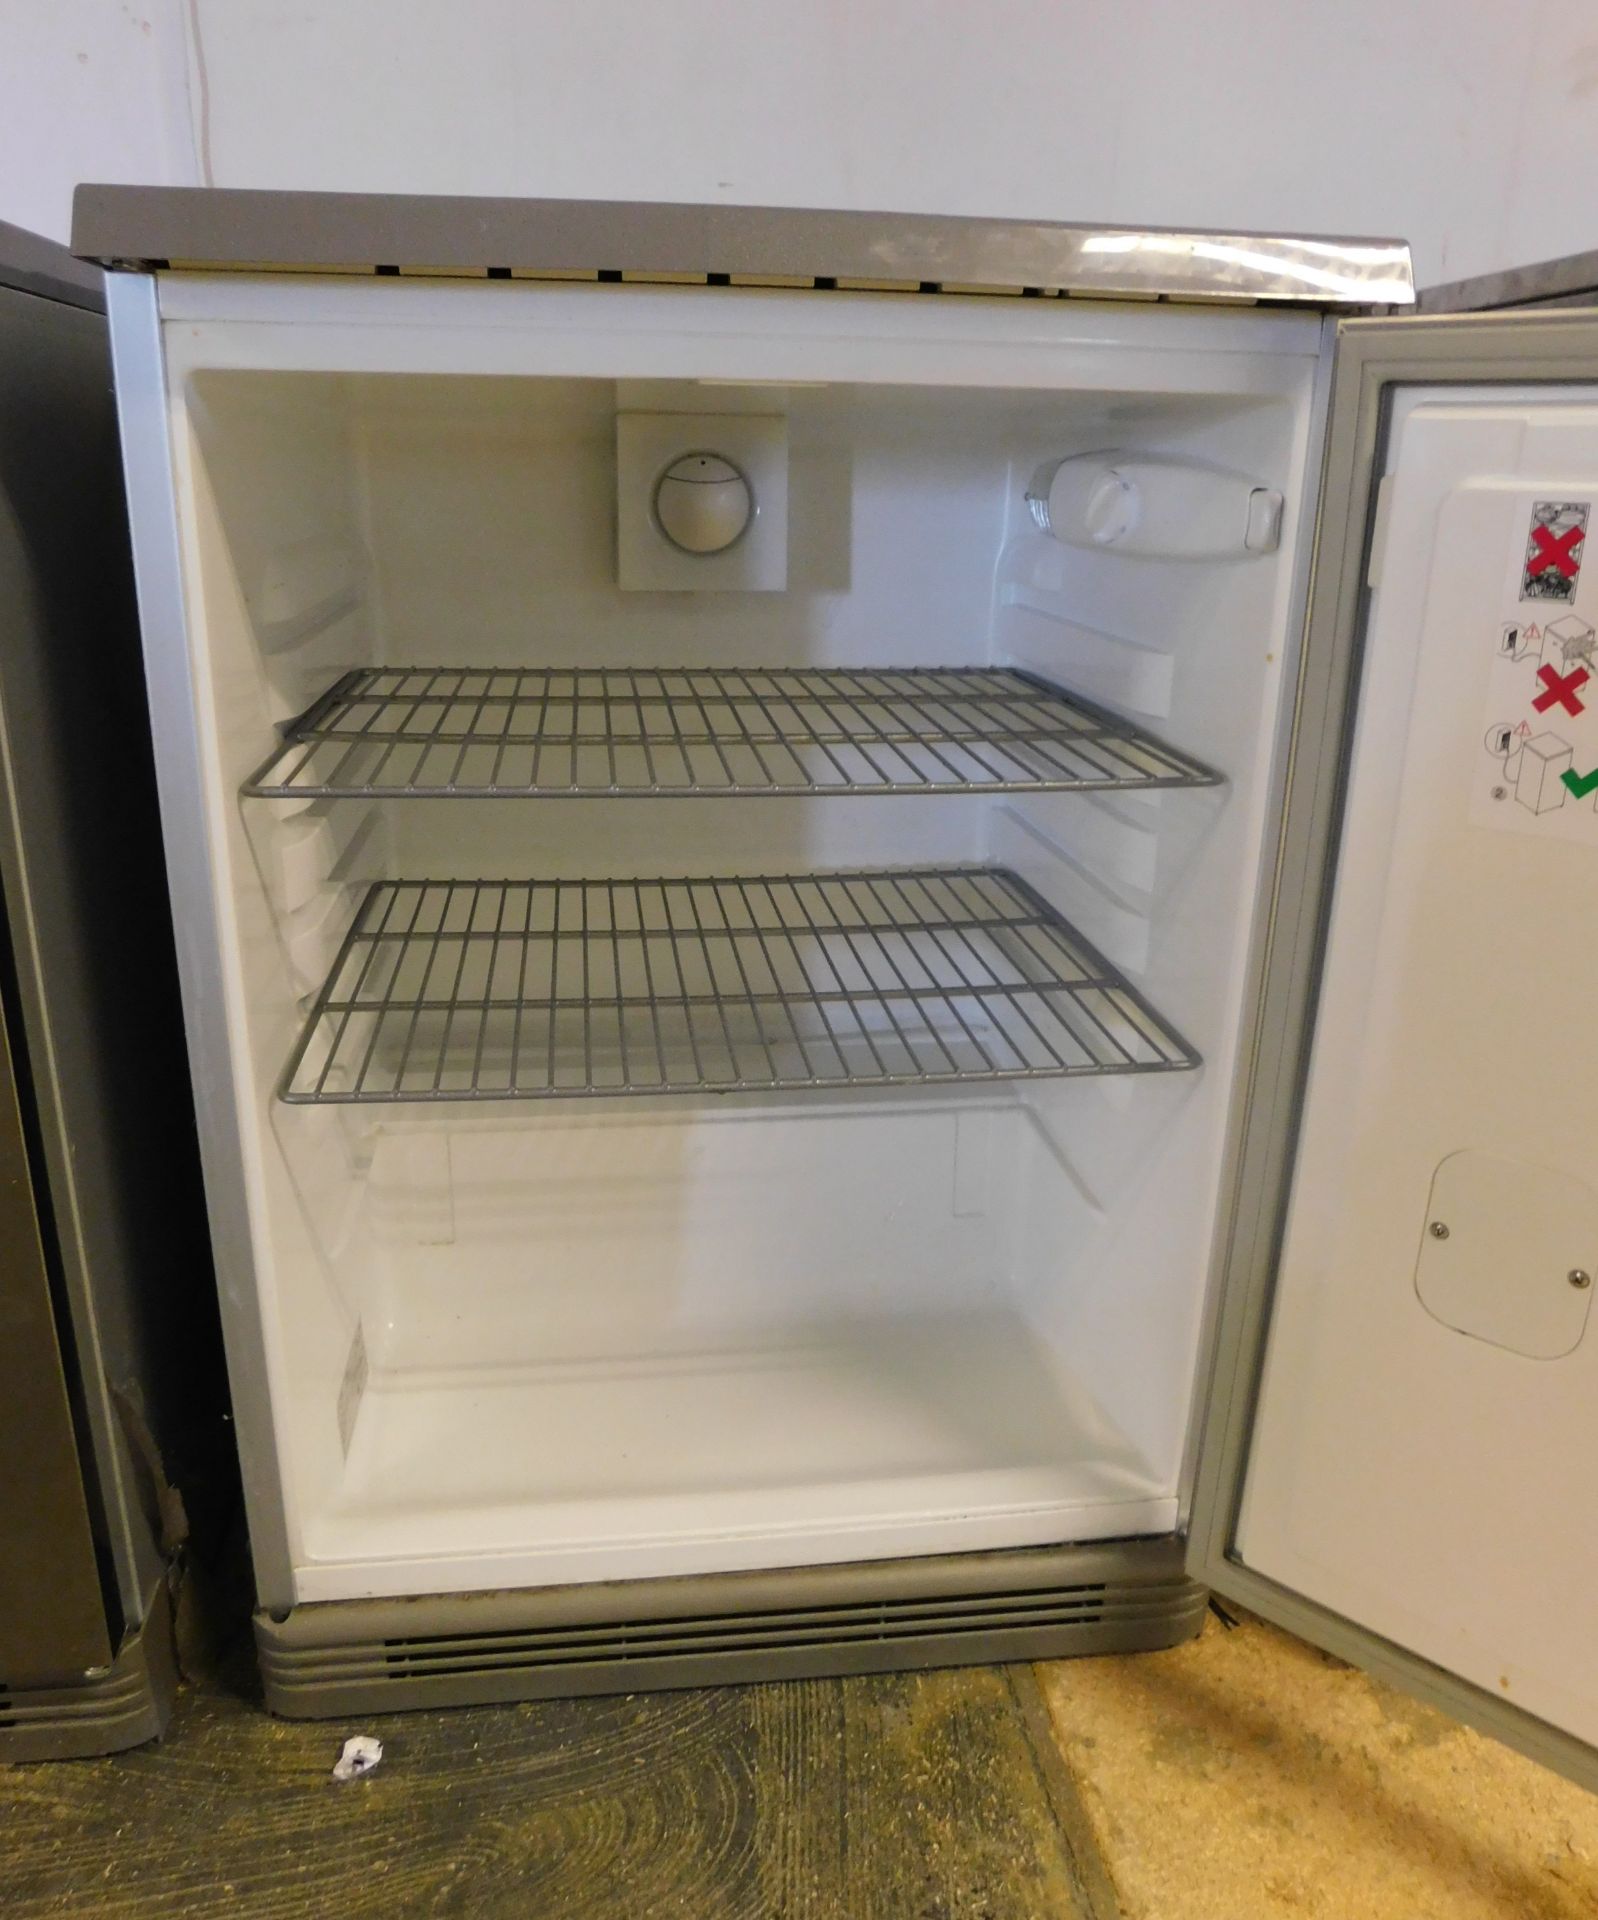 Electrolux RUCR16X1G Under Counter Refrigerator with Stainless Steel Door, 2015, Serial Number: - Image 2 of 2